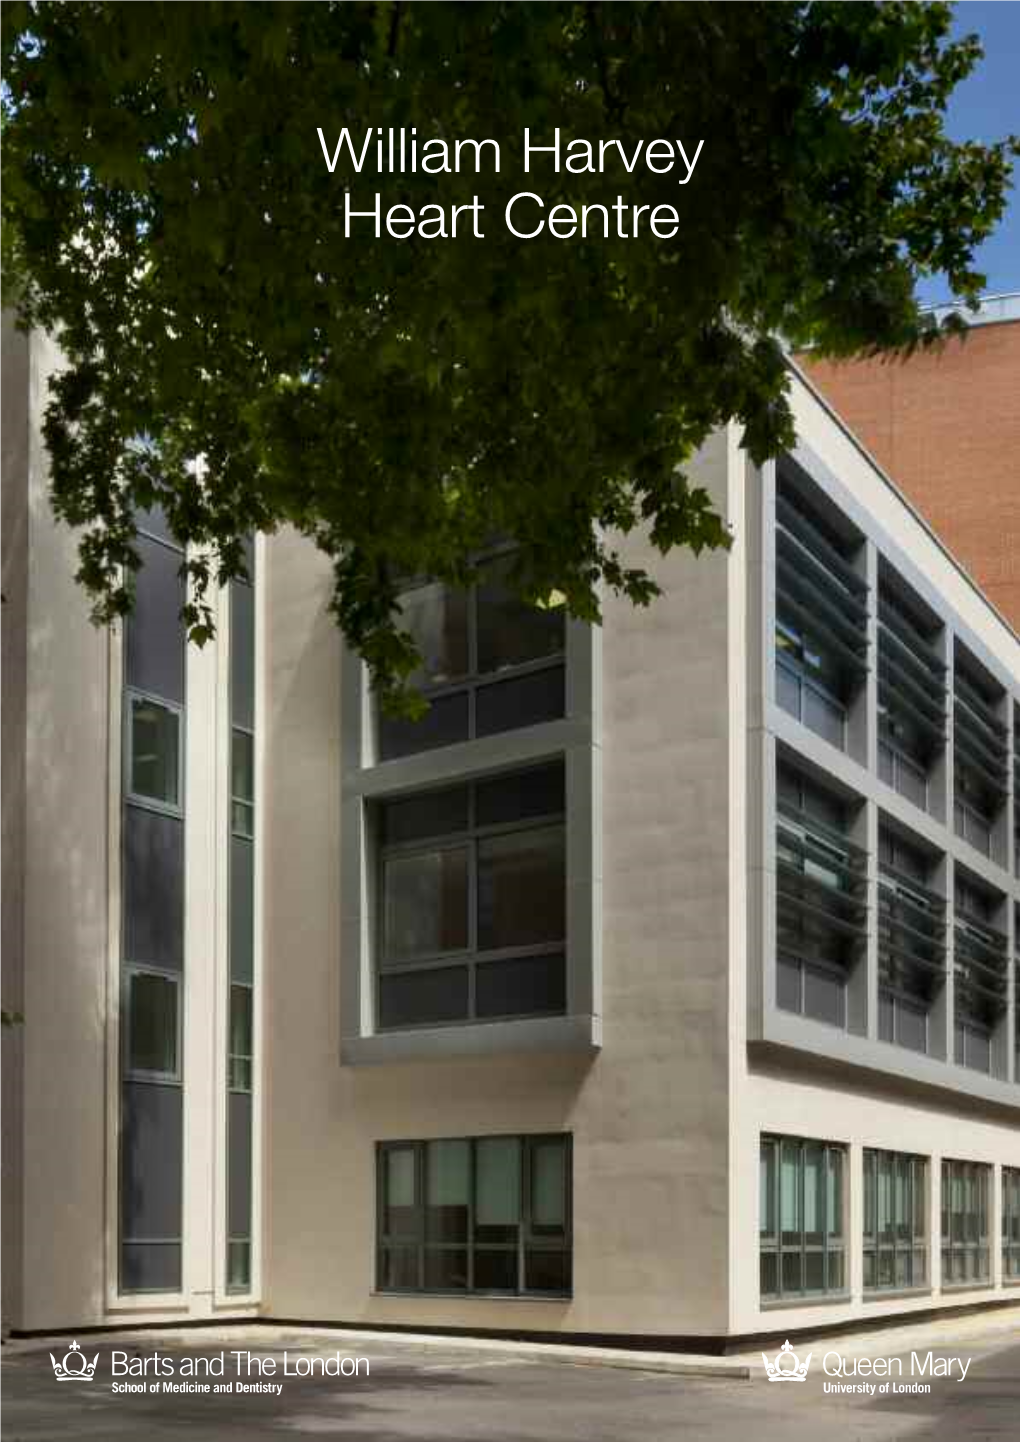 William Harvey Heart Centre “...A World-Class Institute for Cardiovascular Research in the Heart of London